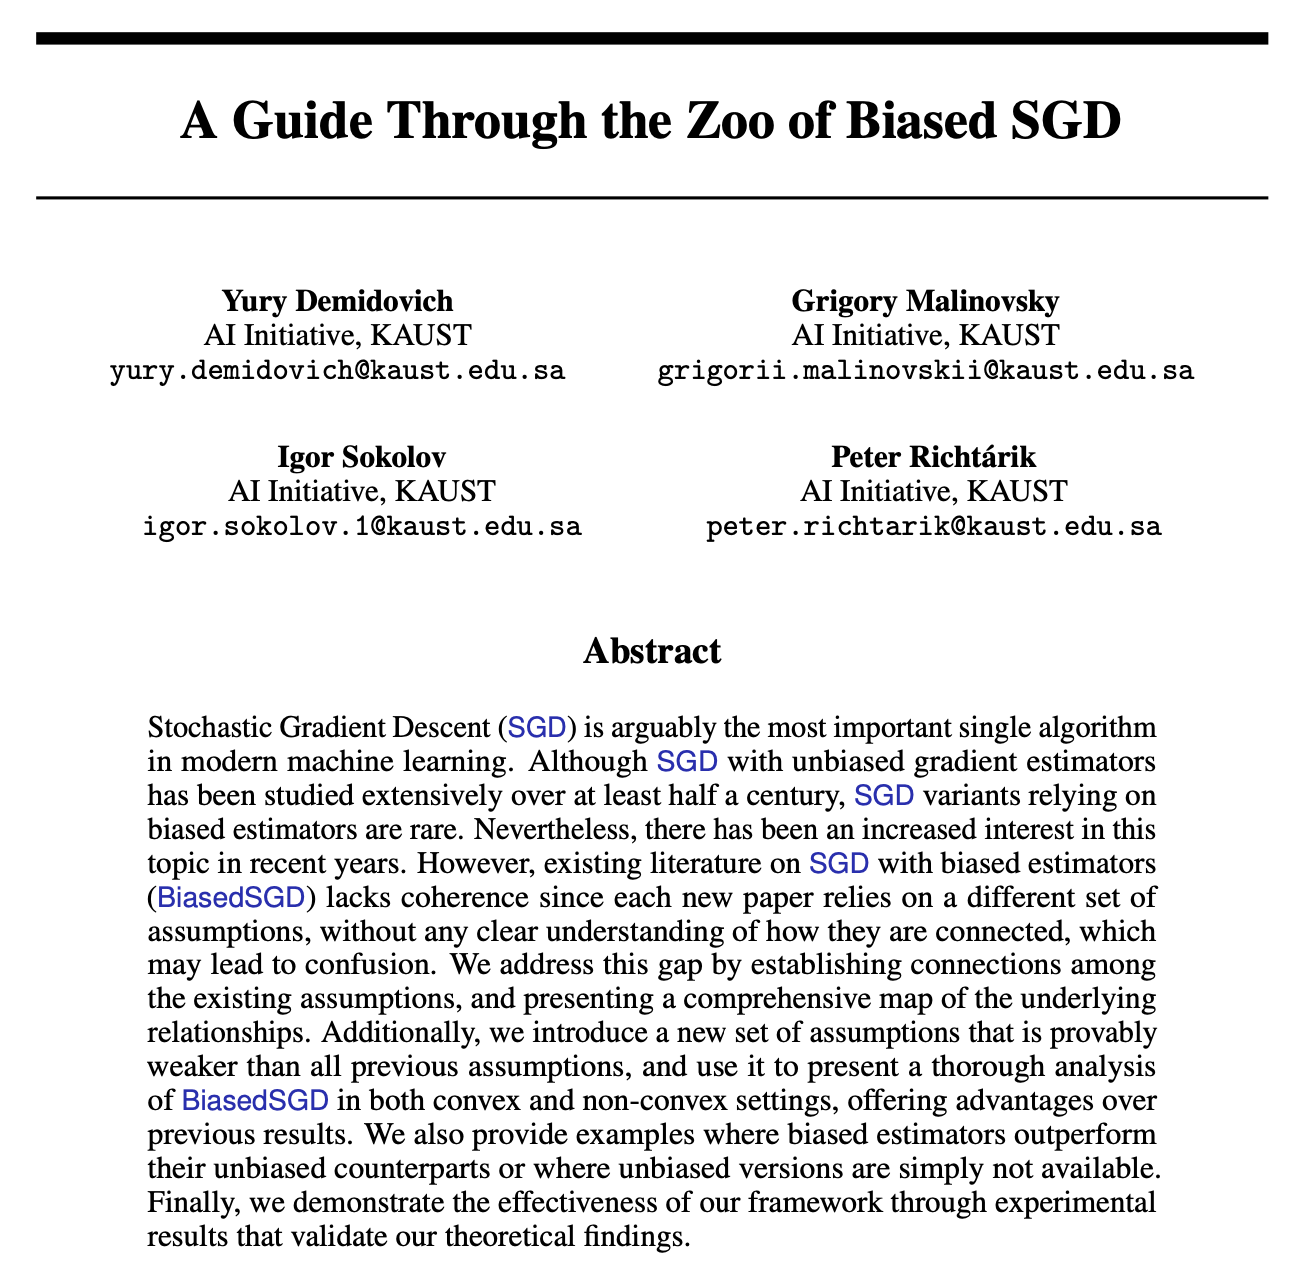 A Guide Through the Zoo of Biased SGD